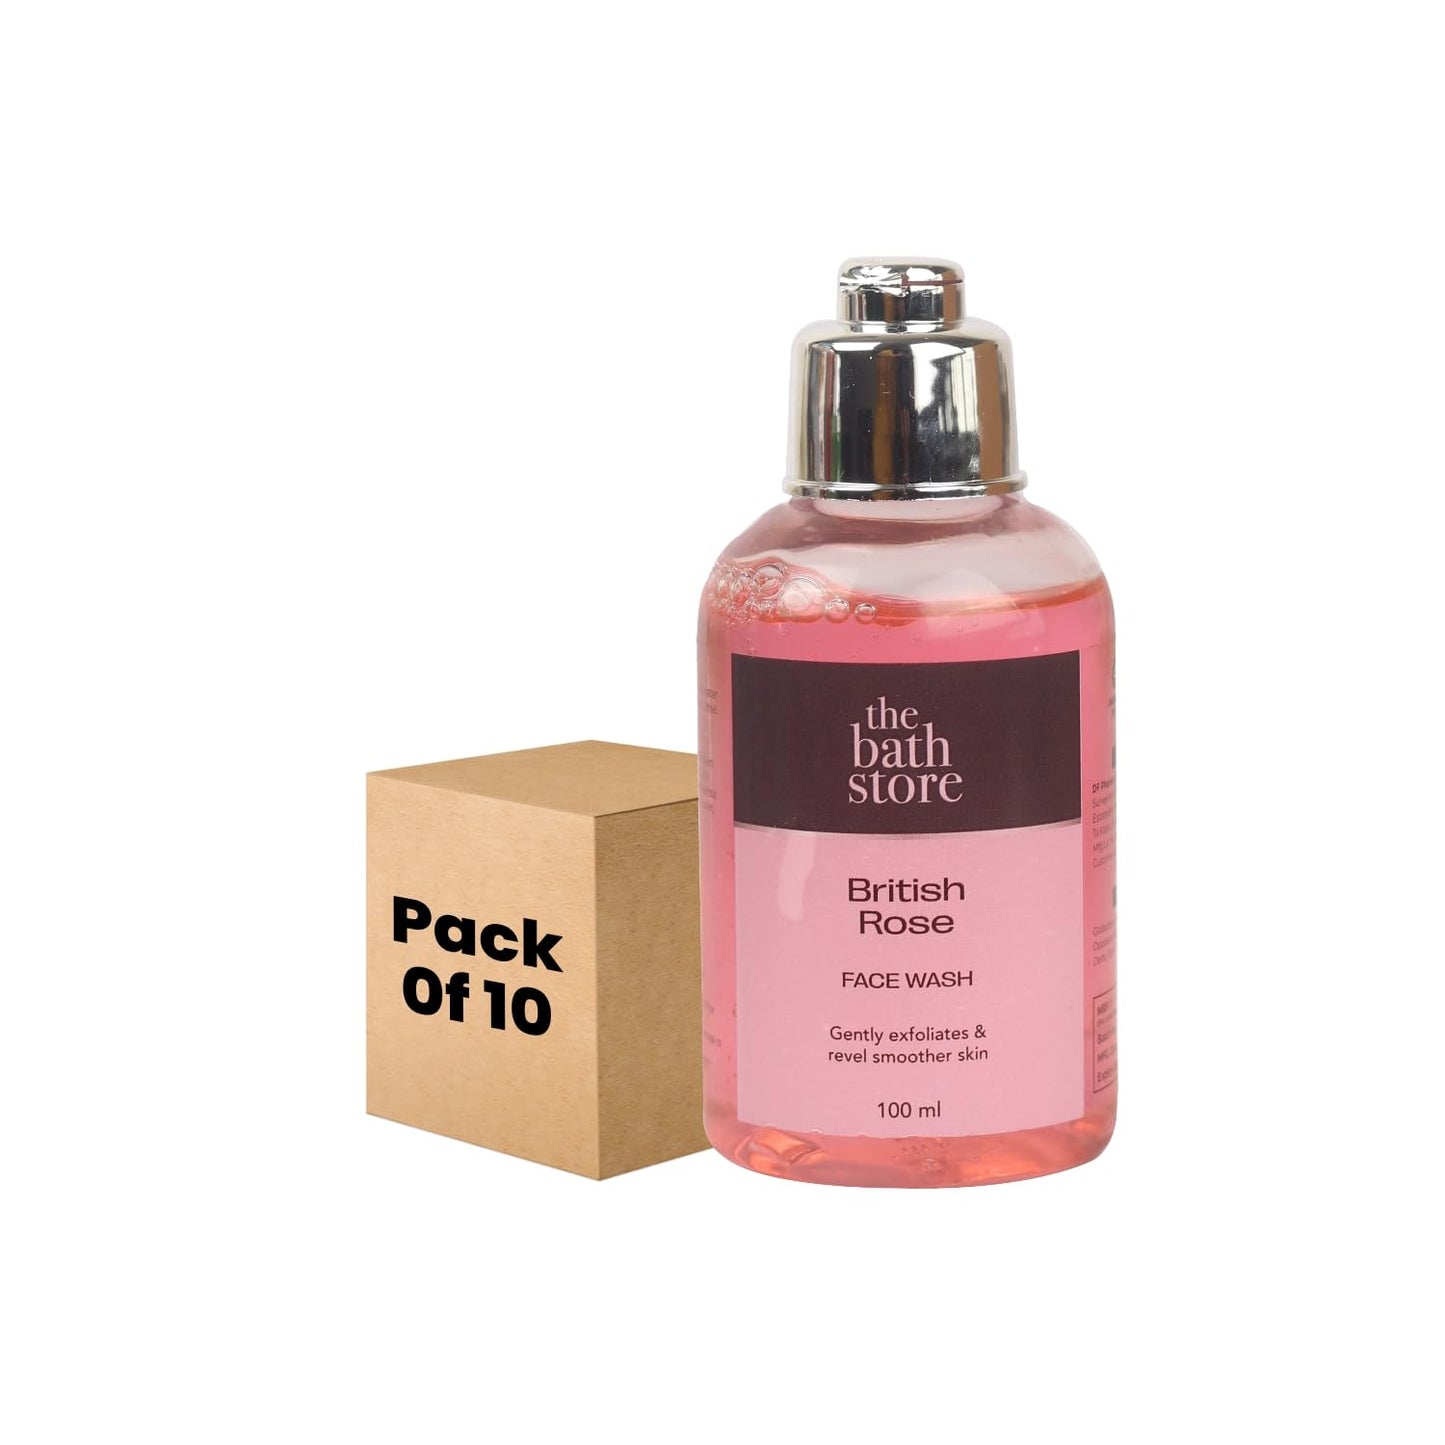 The Bath Store British Rose Face Wash - Gentle Exfoliation  Deep Cleansing - 100ml Pack of 10